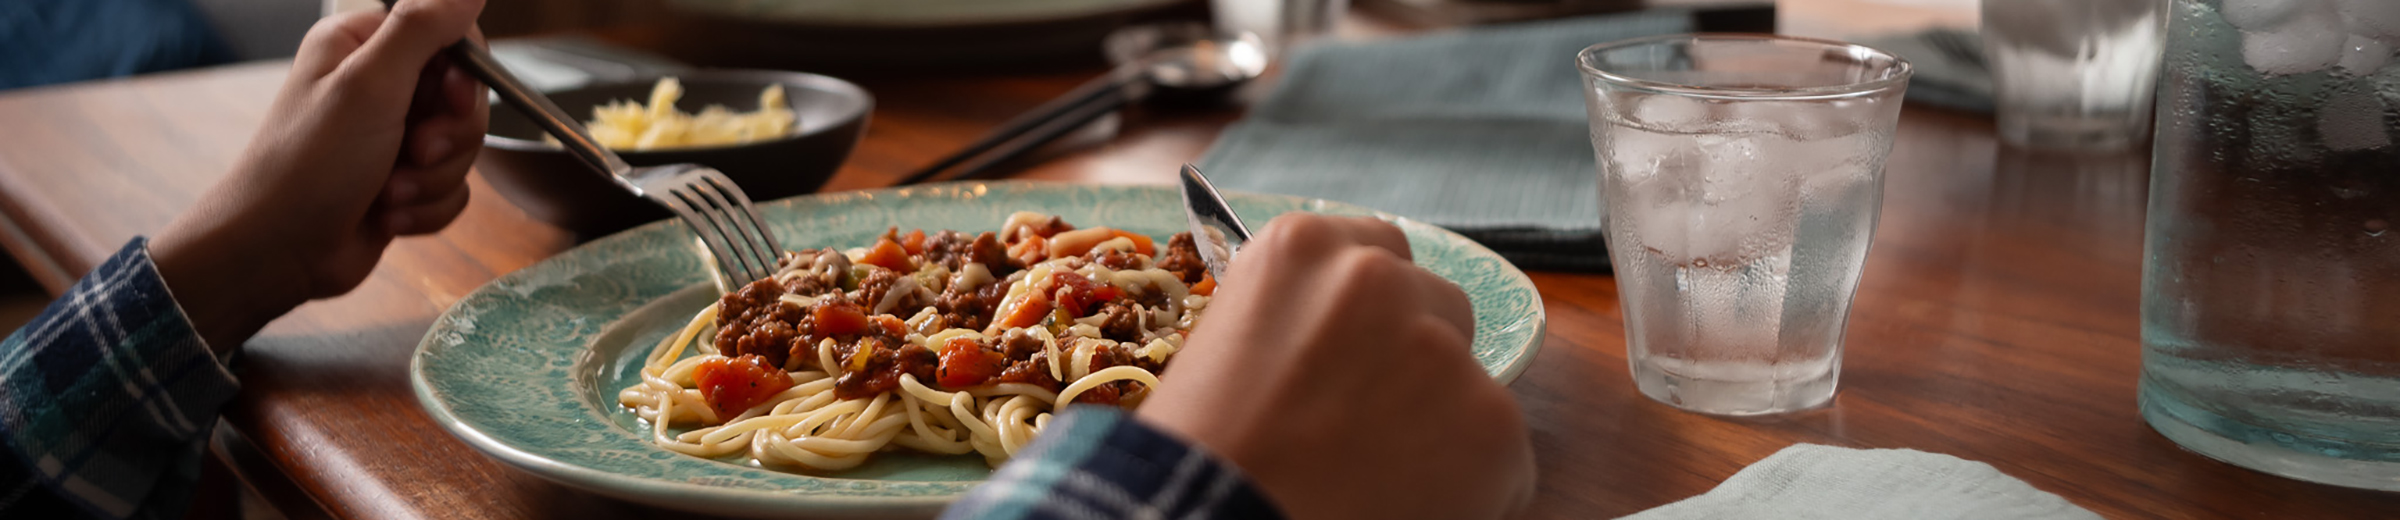 Hands holding a fork and knife over a plate of spaghetti at a dinner table.